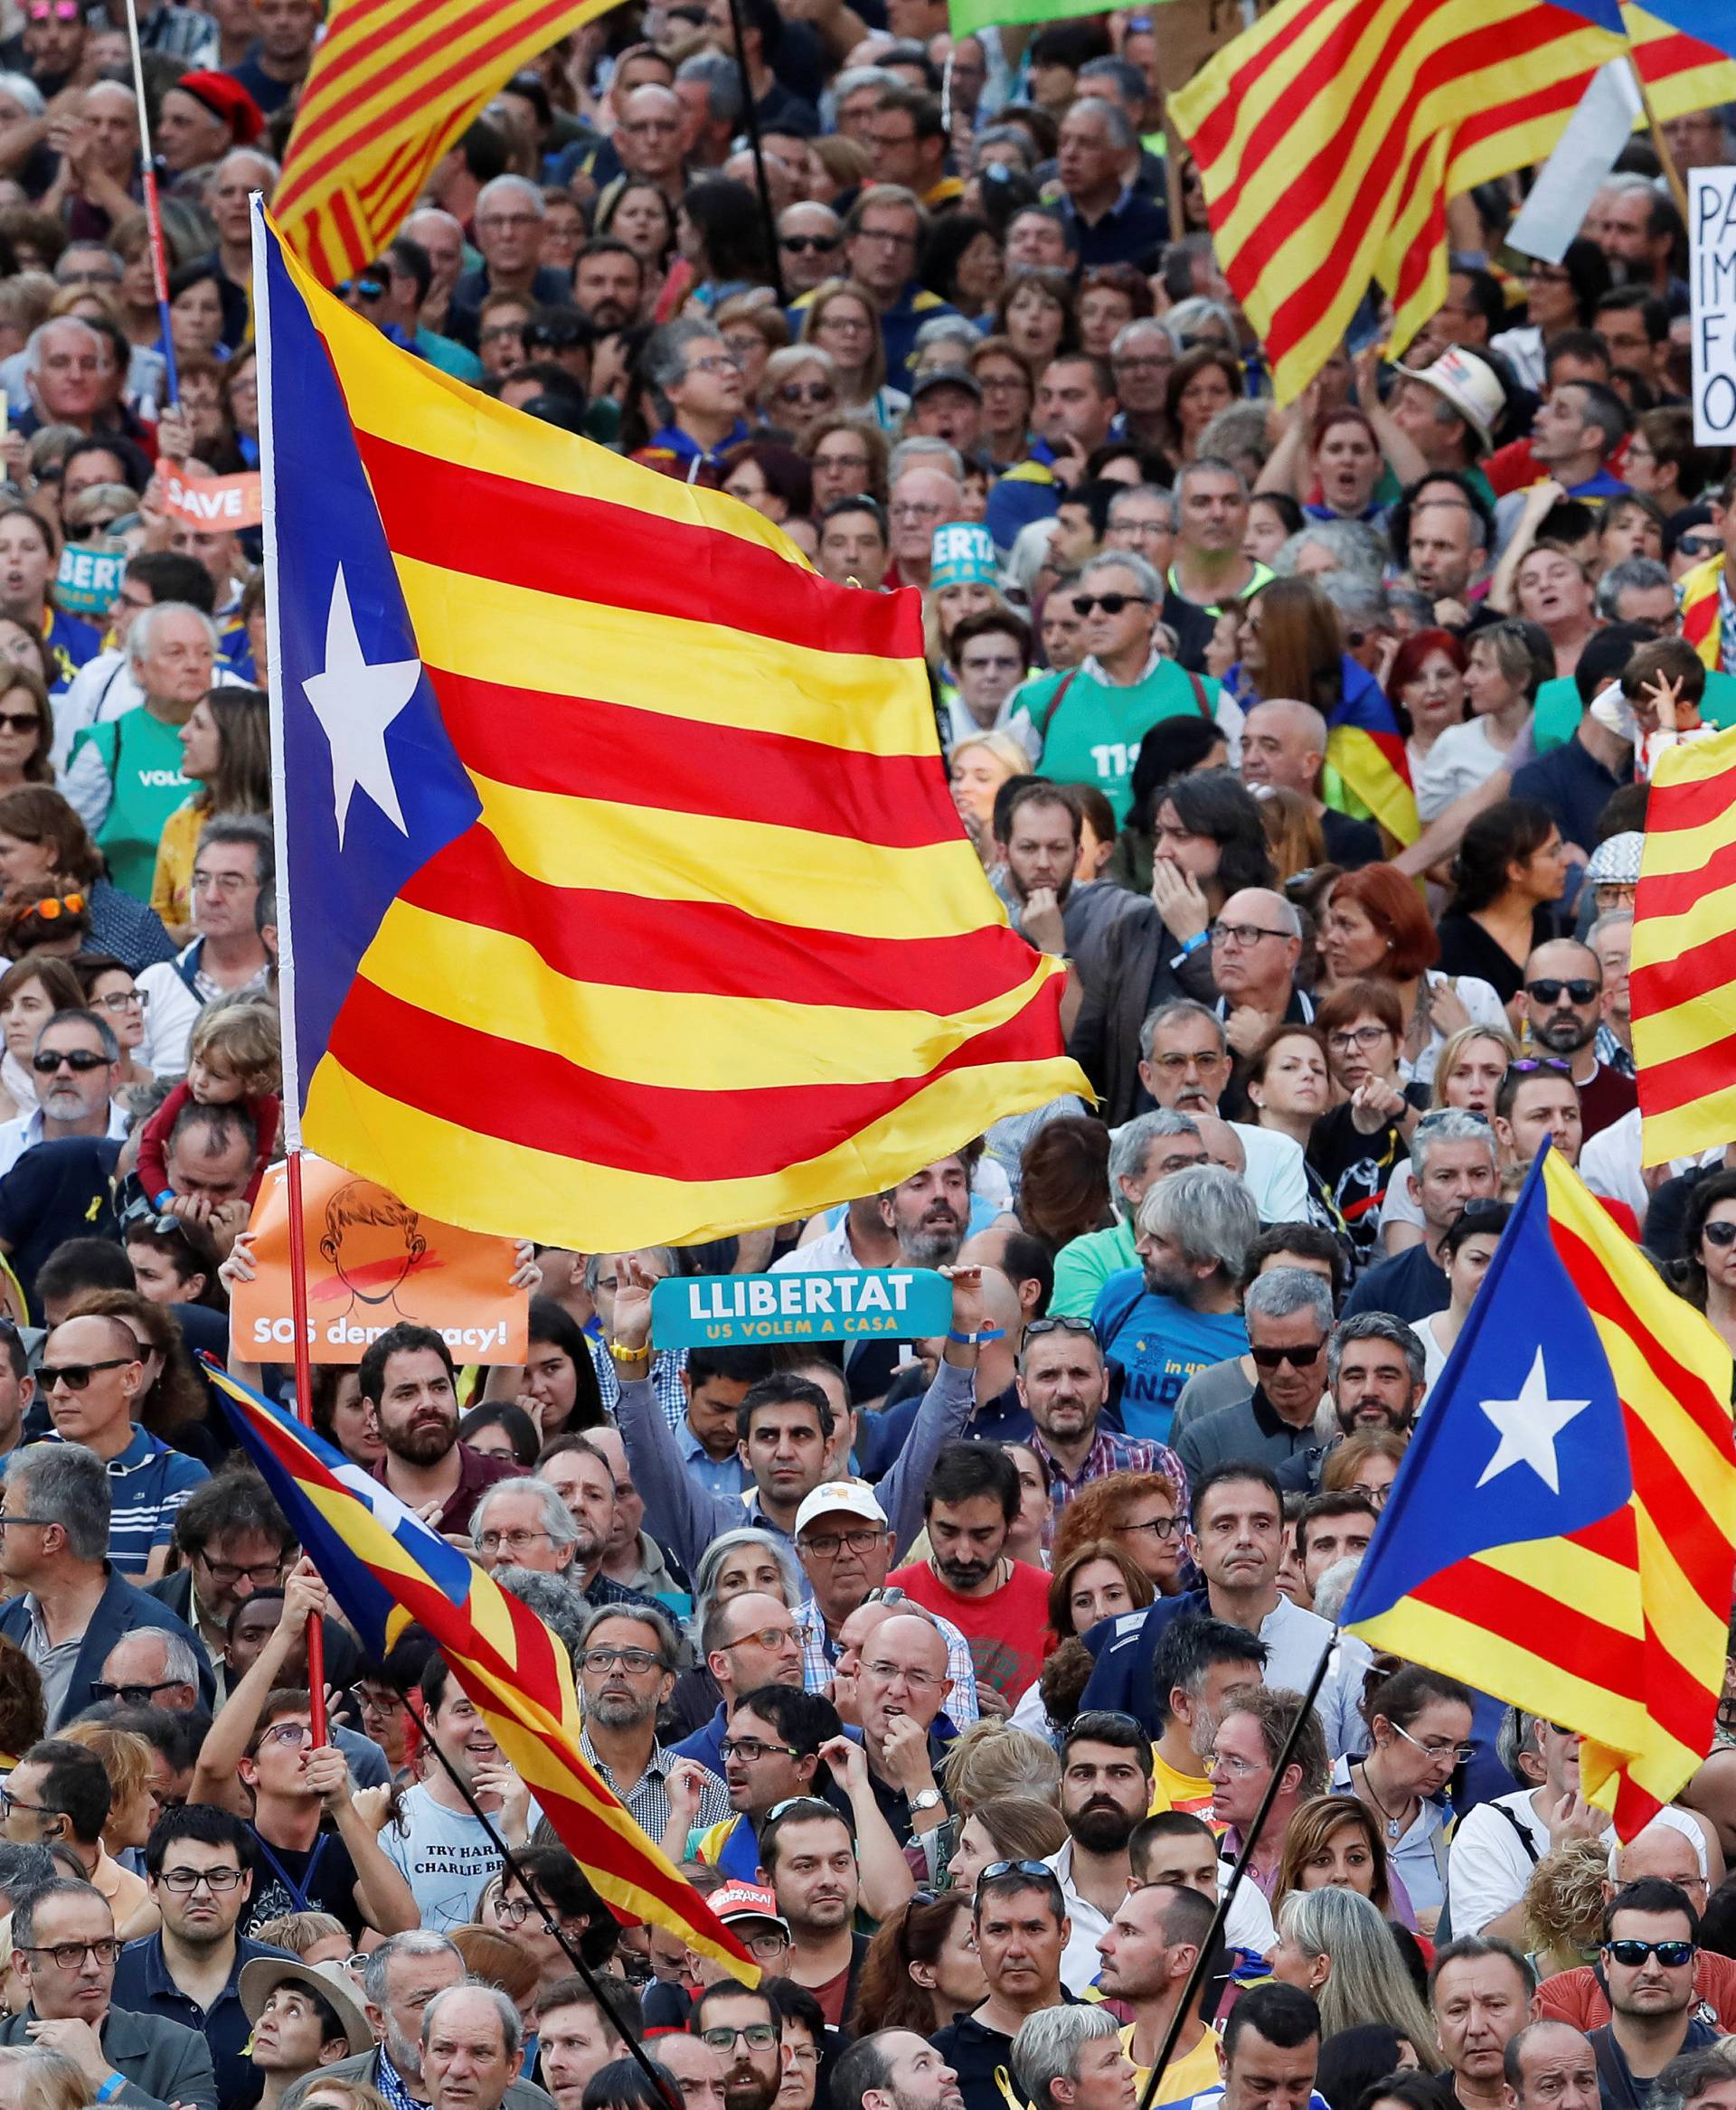 People wave Catalan separatist flags during a demonstration organised by Catalan pro-independence movements ANC (Catalan National Assembly) and Omnium Cutural, following the imprisonment of their two leaders Jordi Sanchez and Jordi Cuixart, in Barcelona